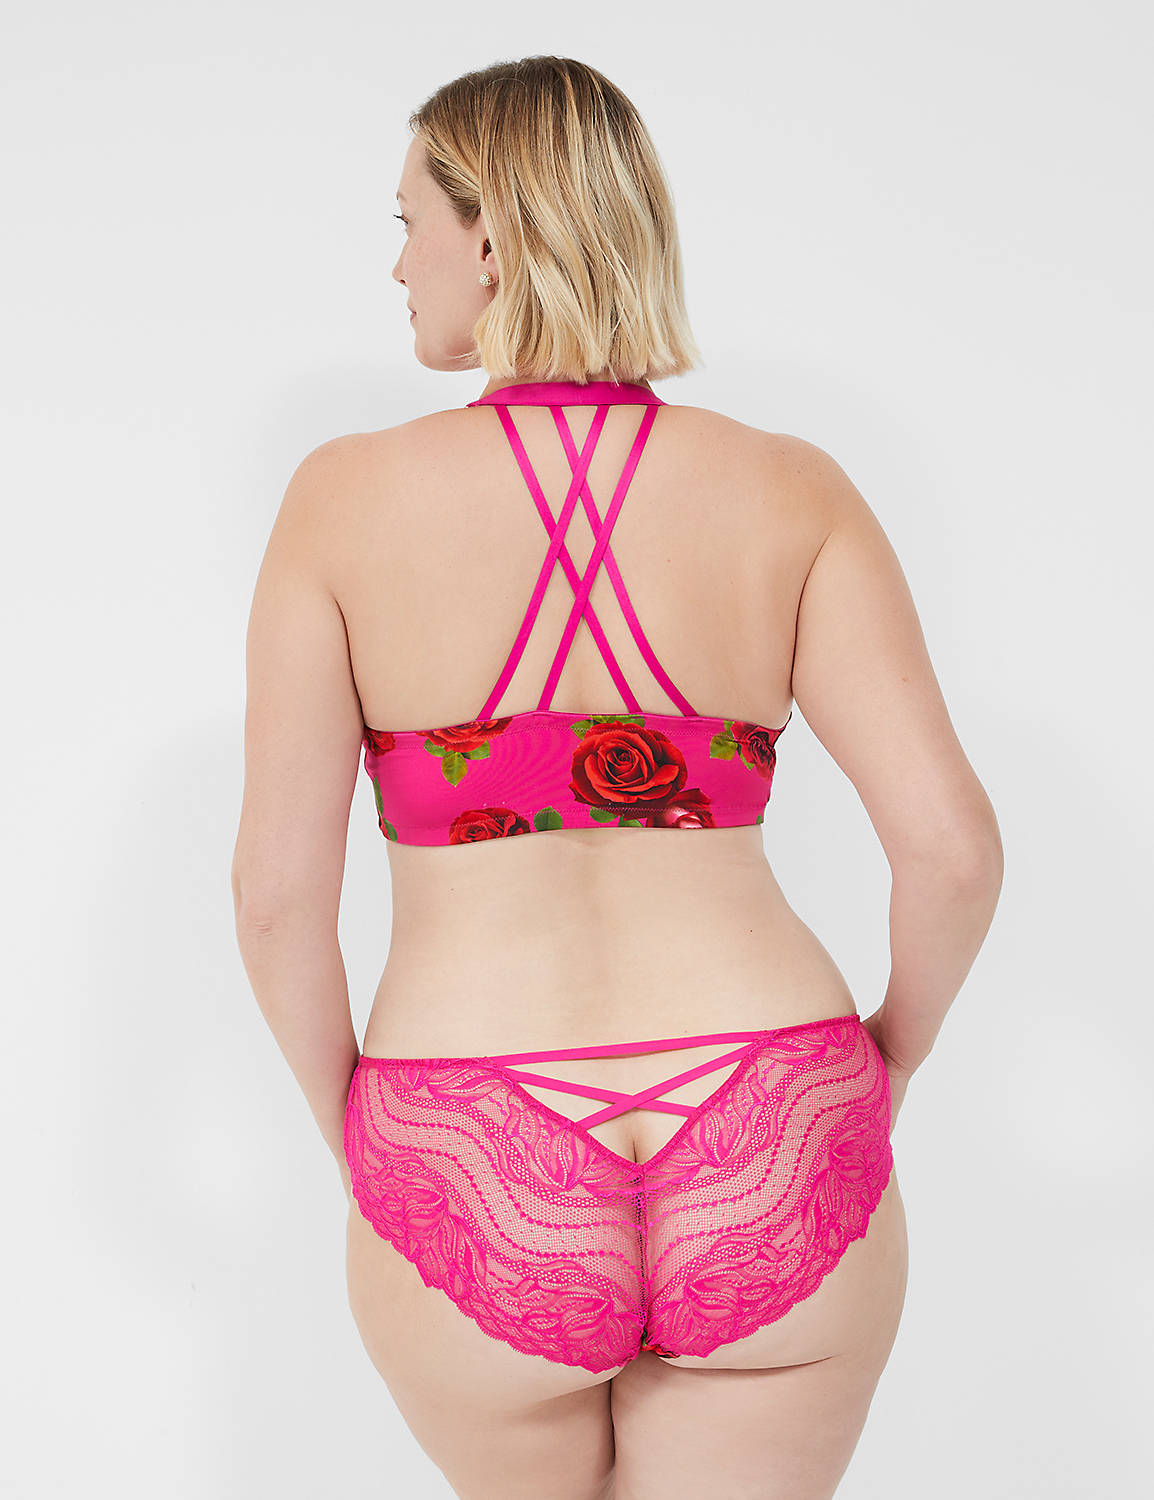 Lace Back Cheeky Panty 1137074 Product Image 2